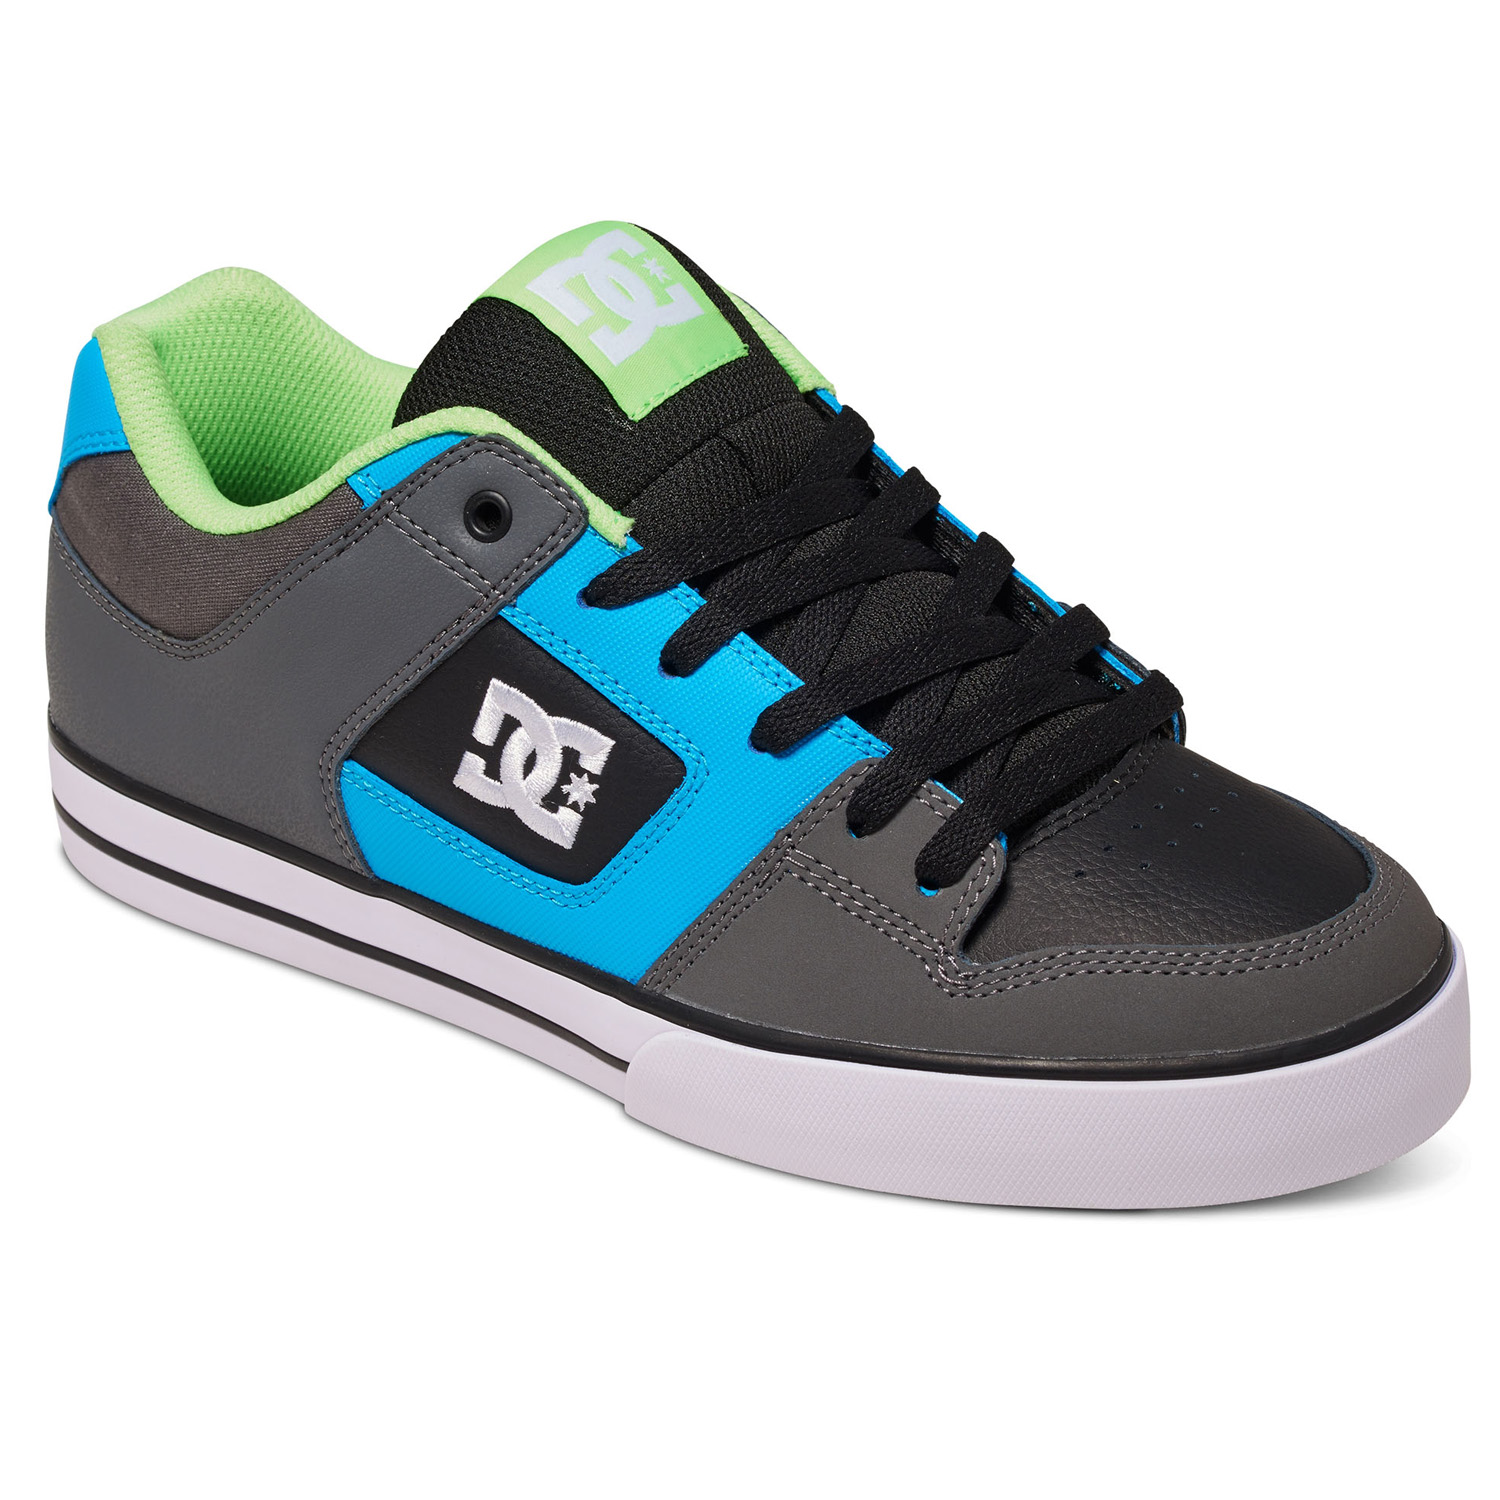 DC shoes Pure Grey/Green/Blue